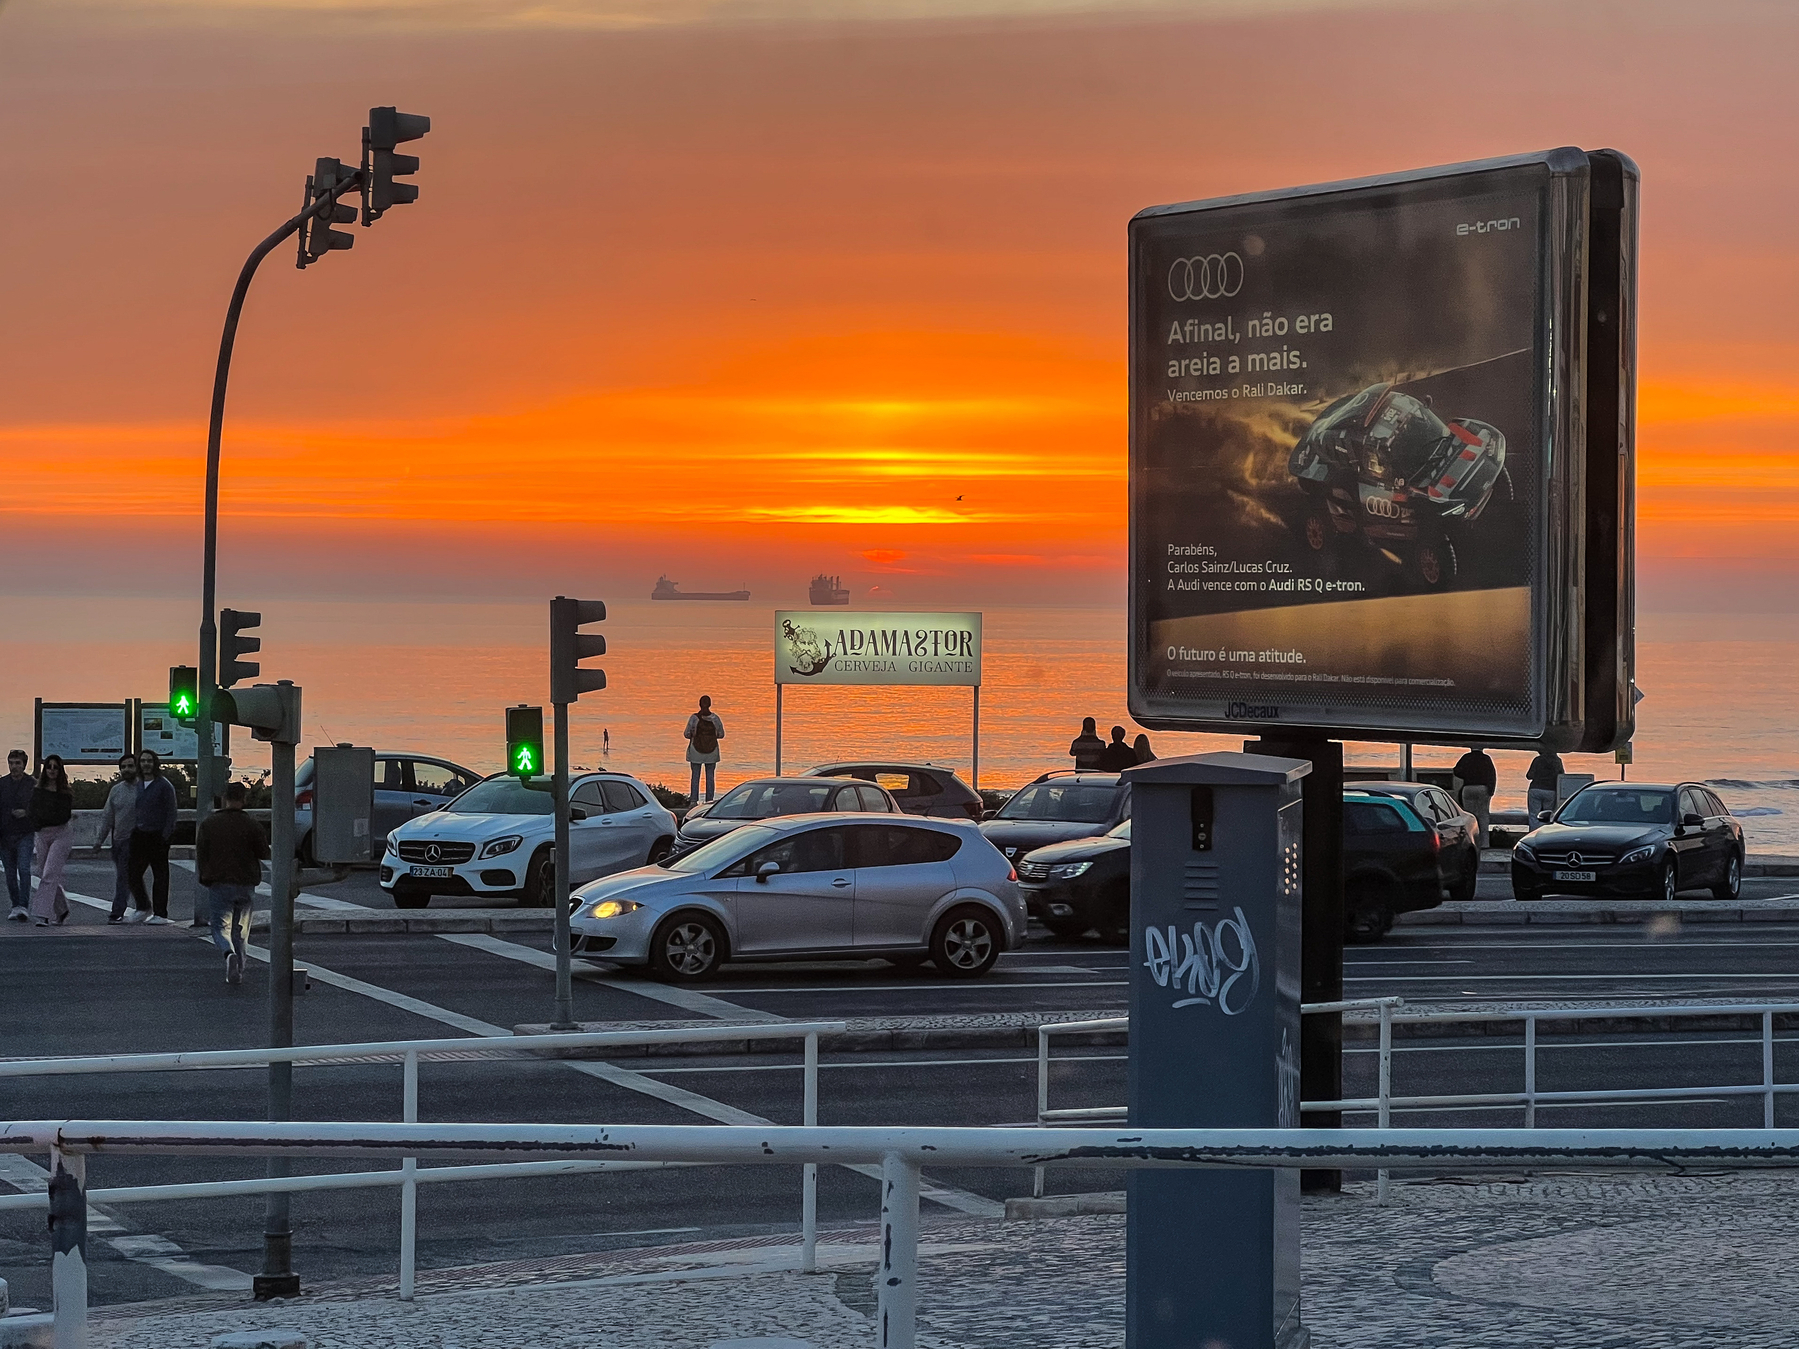 Sunset over a coastal road with pedestrians and cars, traffic lights, and a billboard featuring an Audi advertisement.